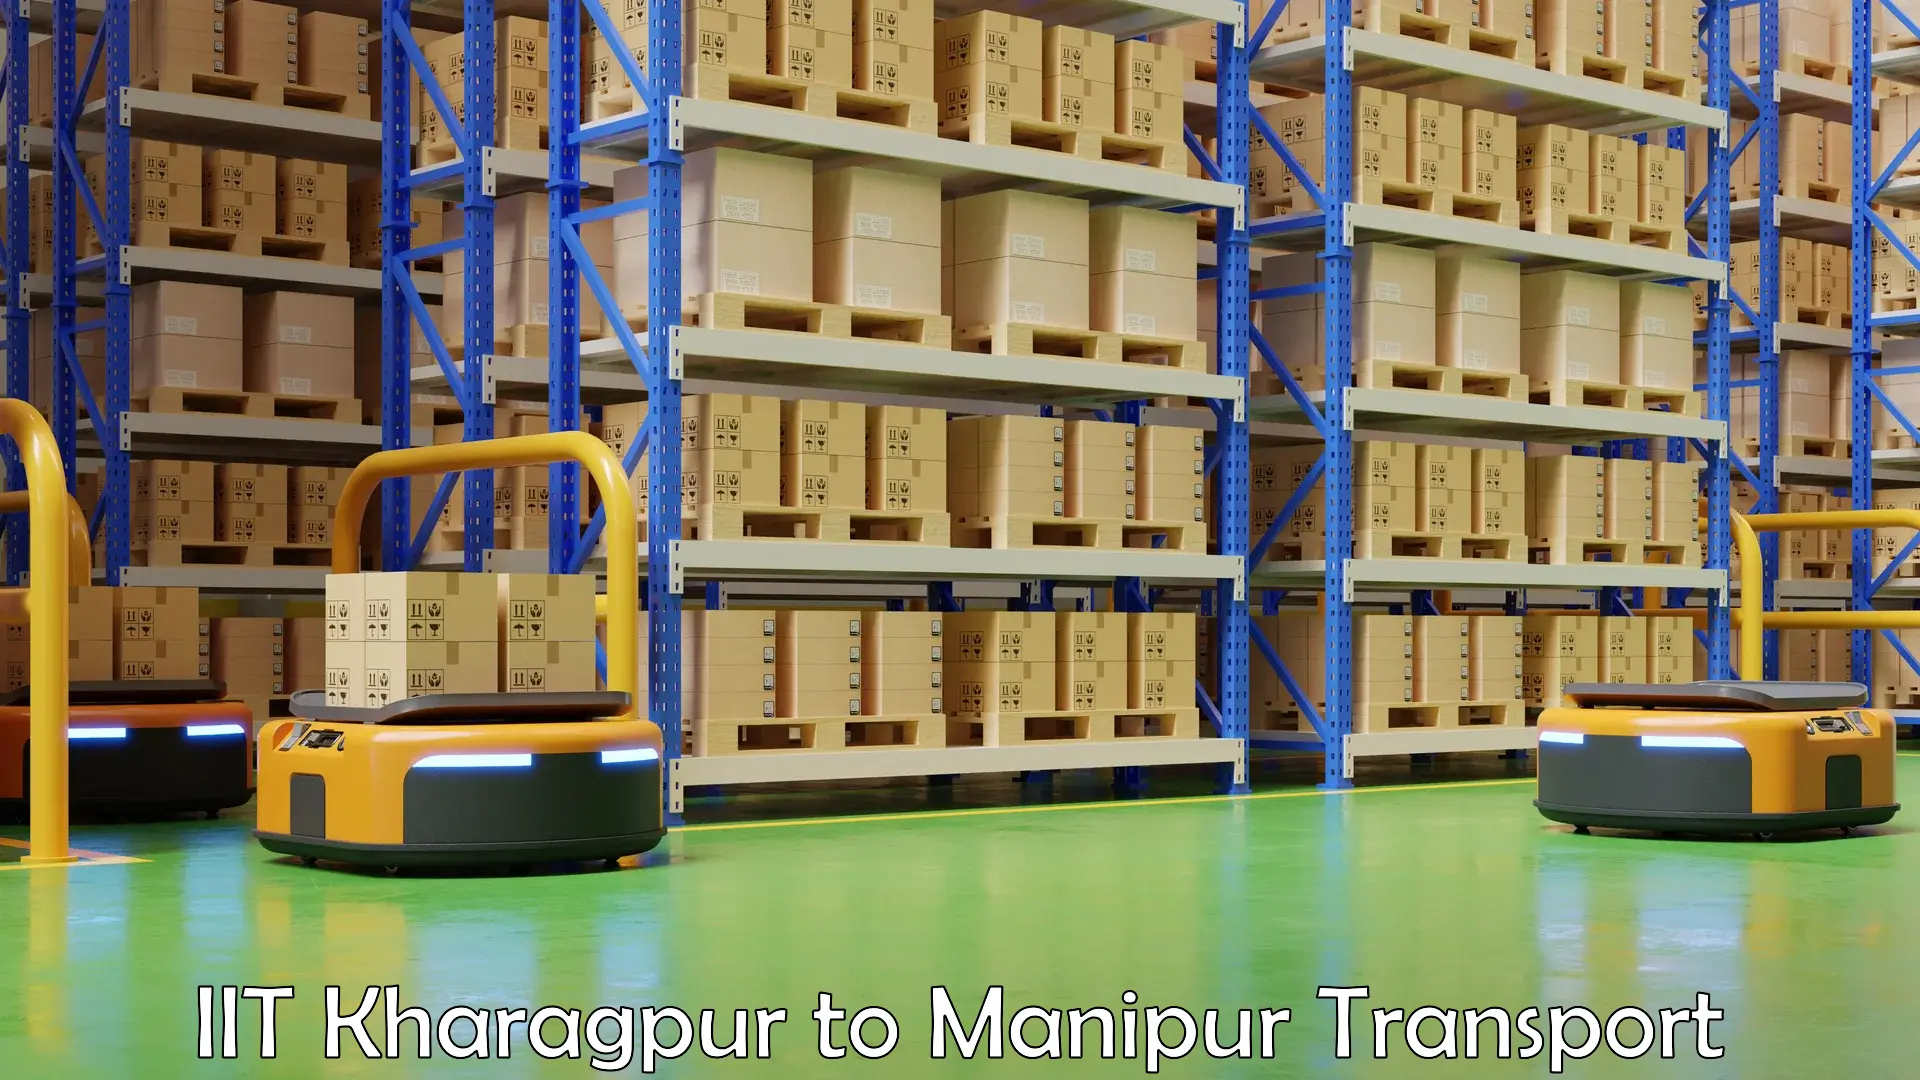 Daily parcel service transport IIT Kharagpur to Manipur